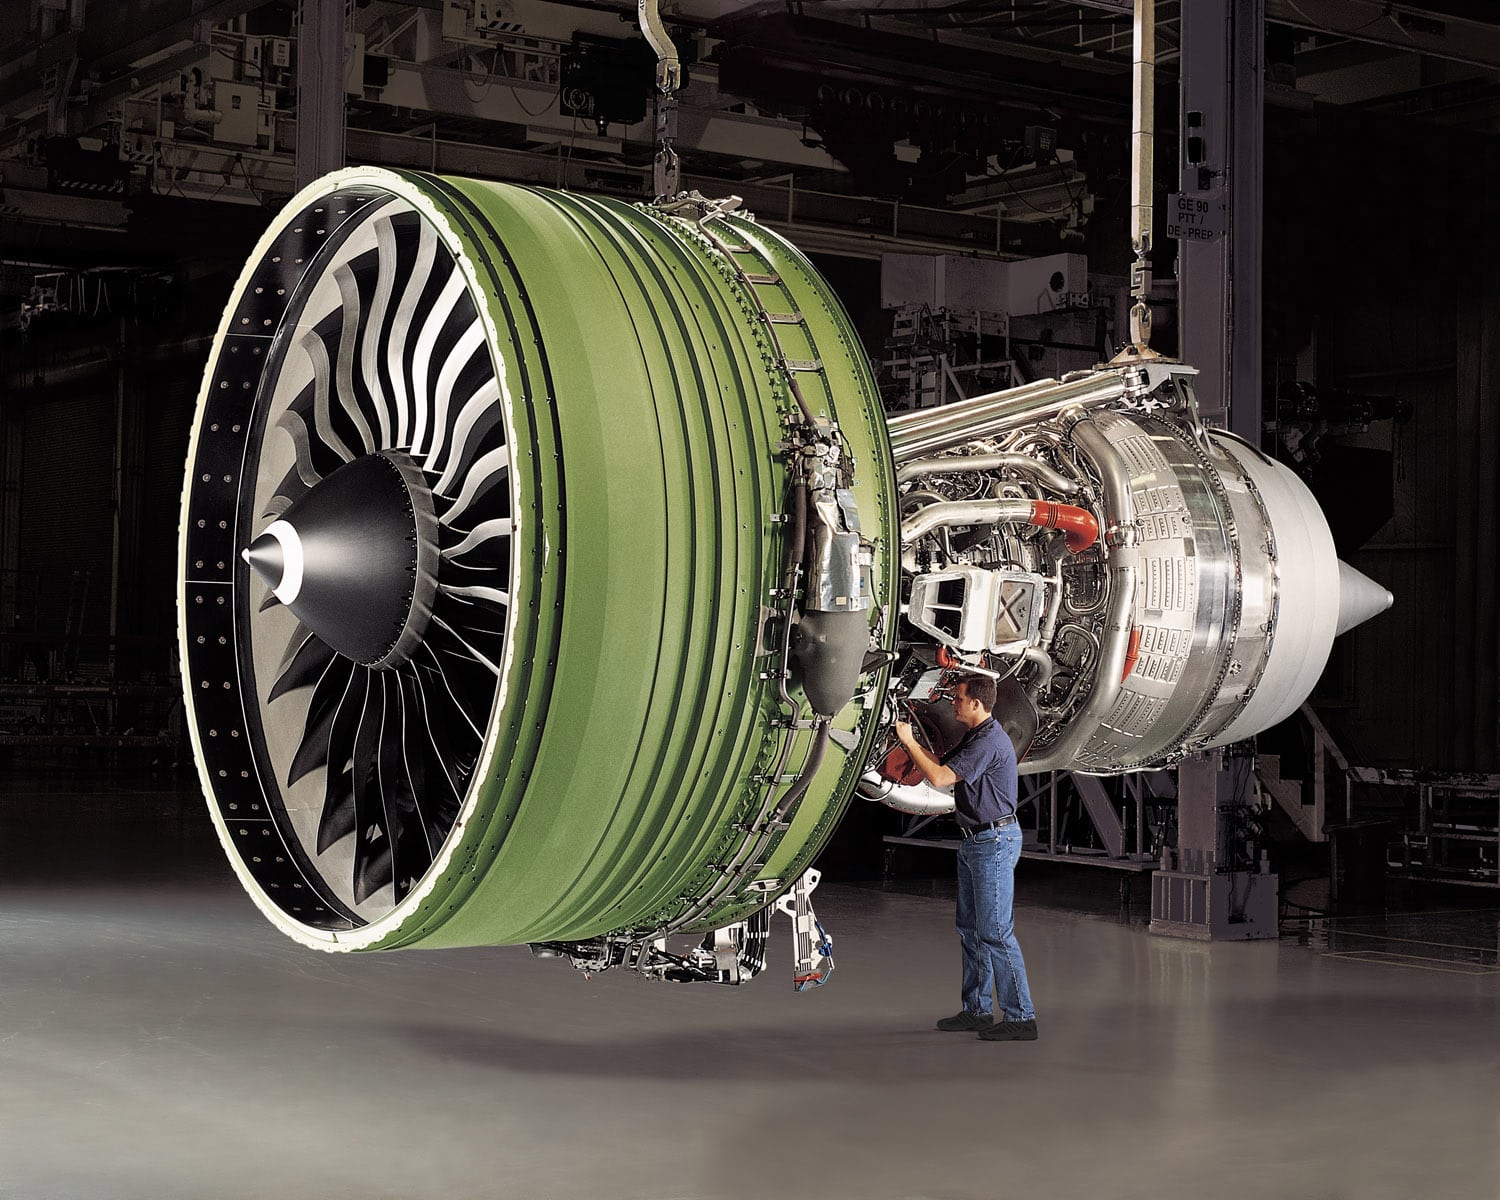 GE90-115B engine with person